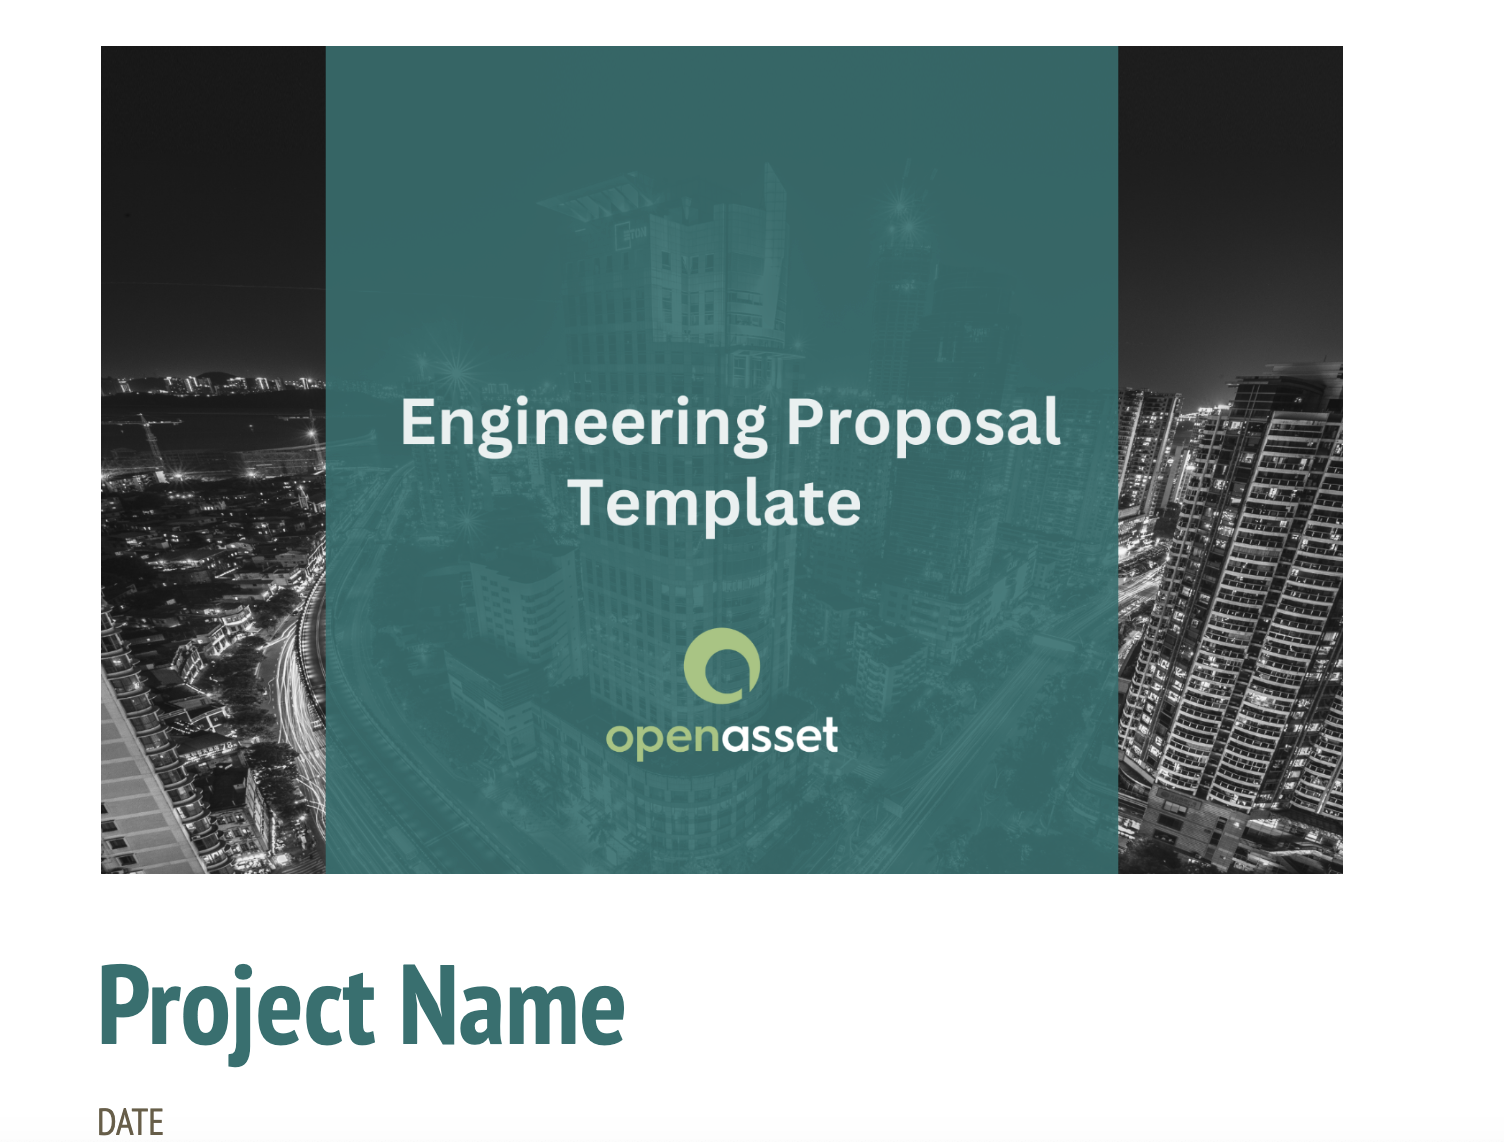 engineering-proposal-template-example